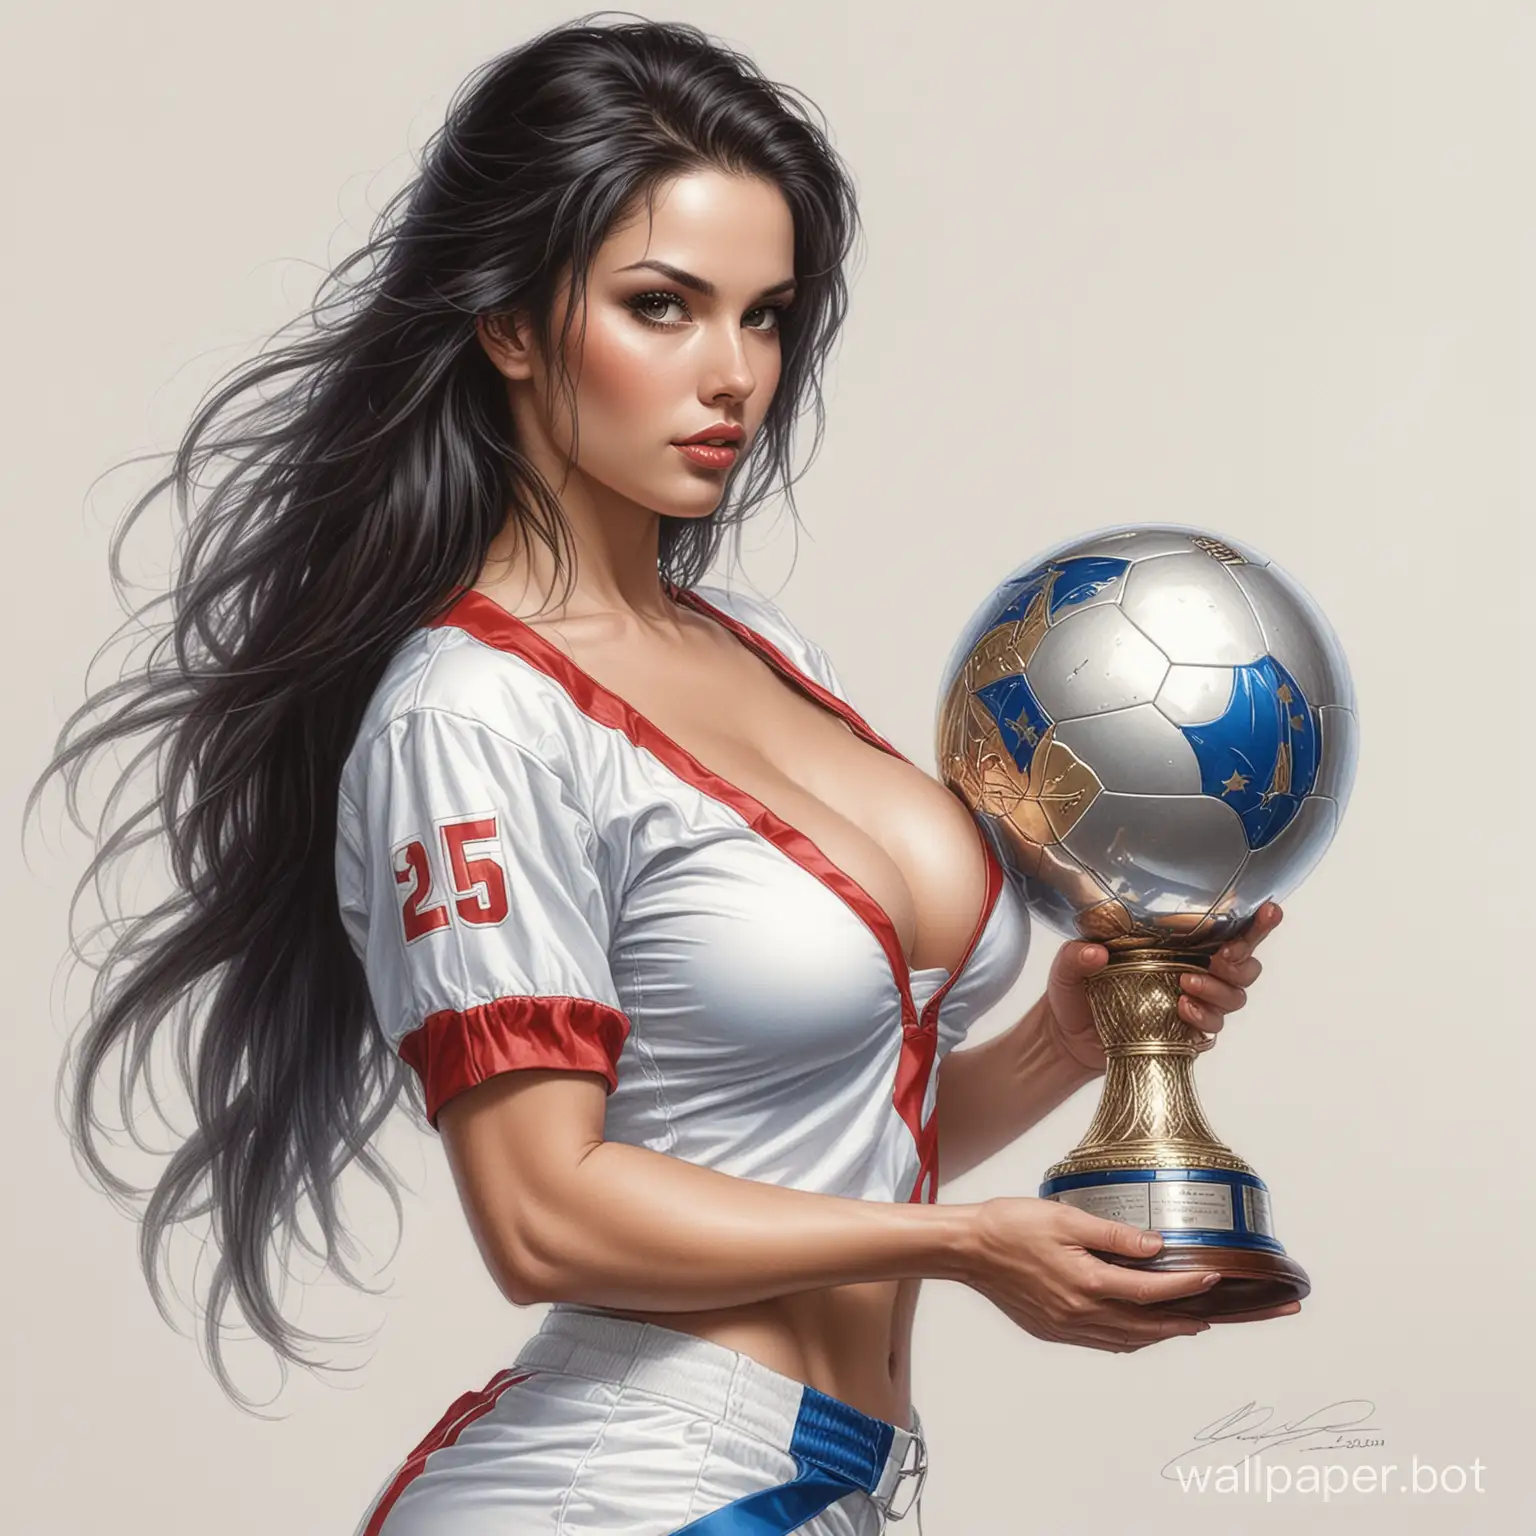 Realistic-Drawing-of-Lisa-Duarte-Holding-Champions-Cup-in-Football-Uniform